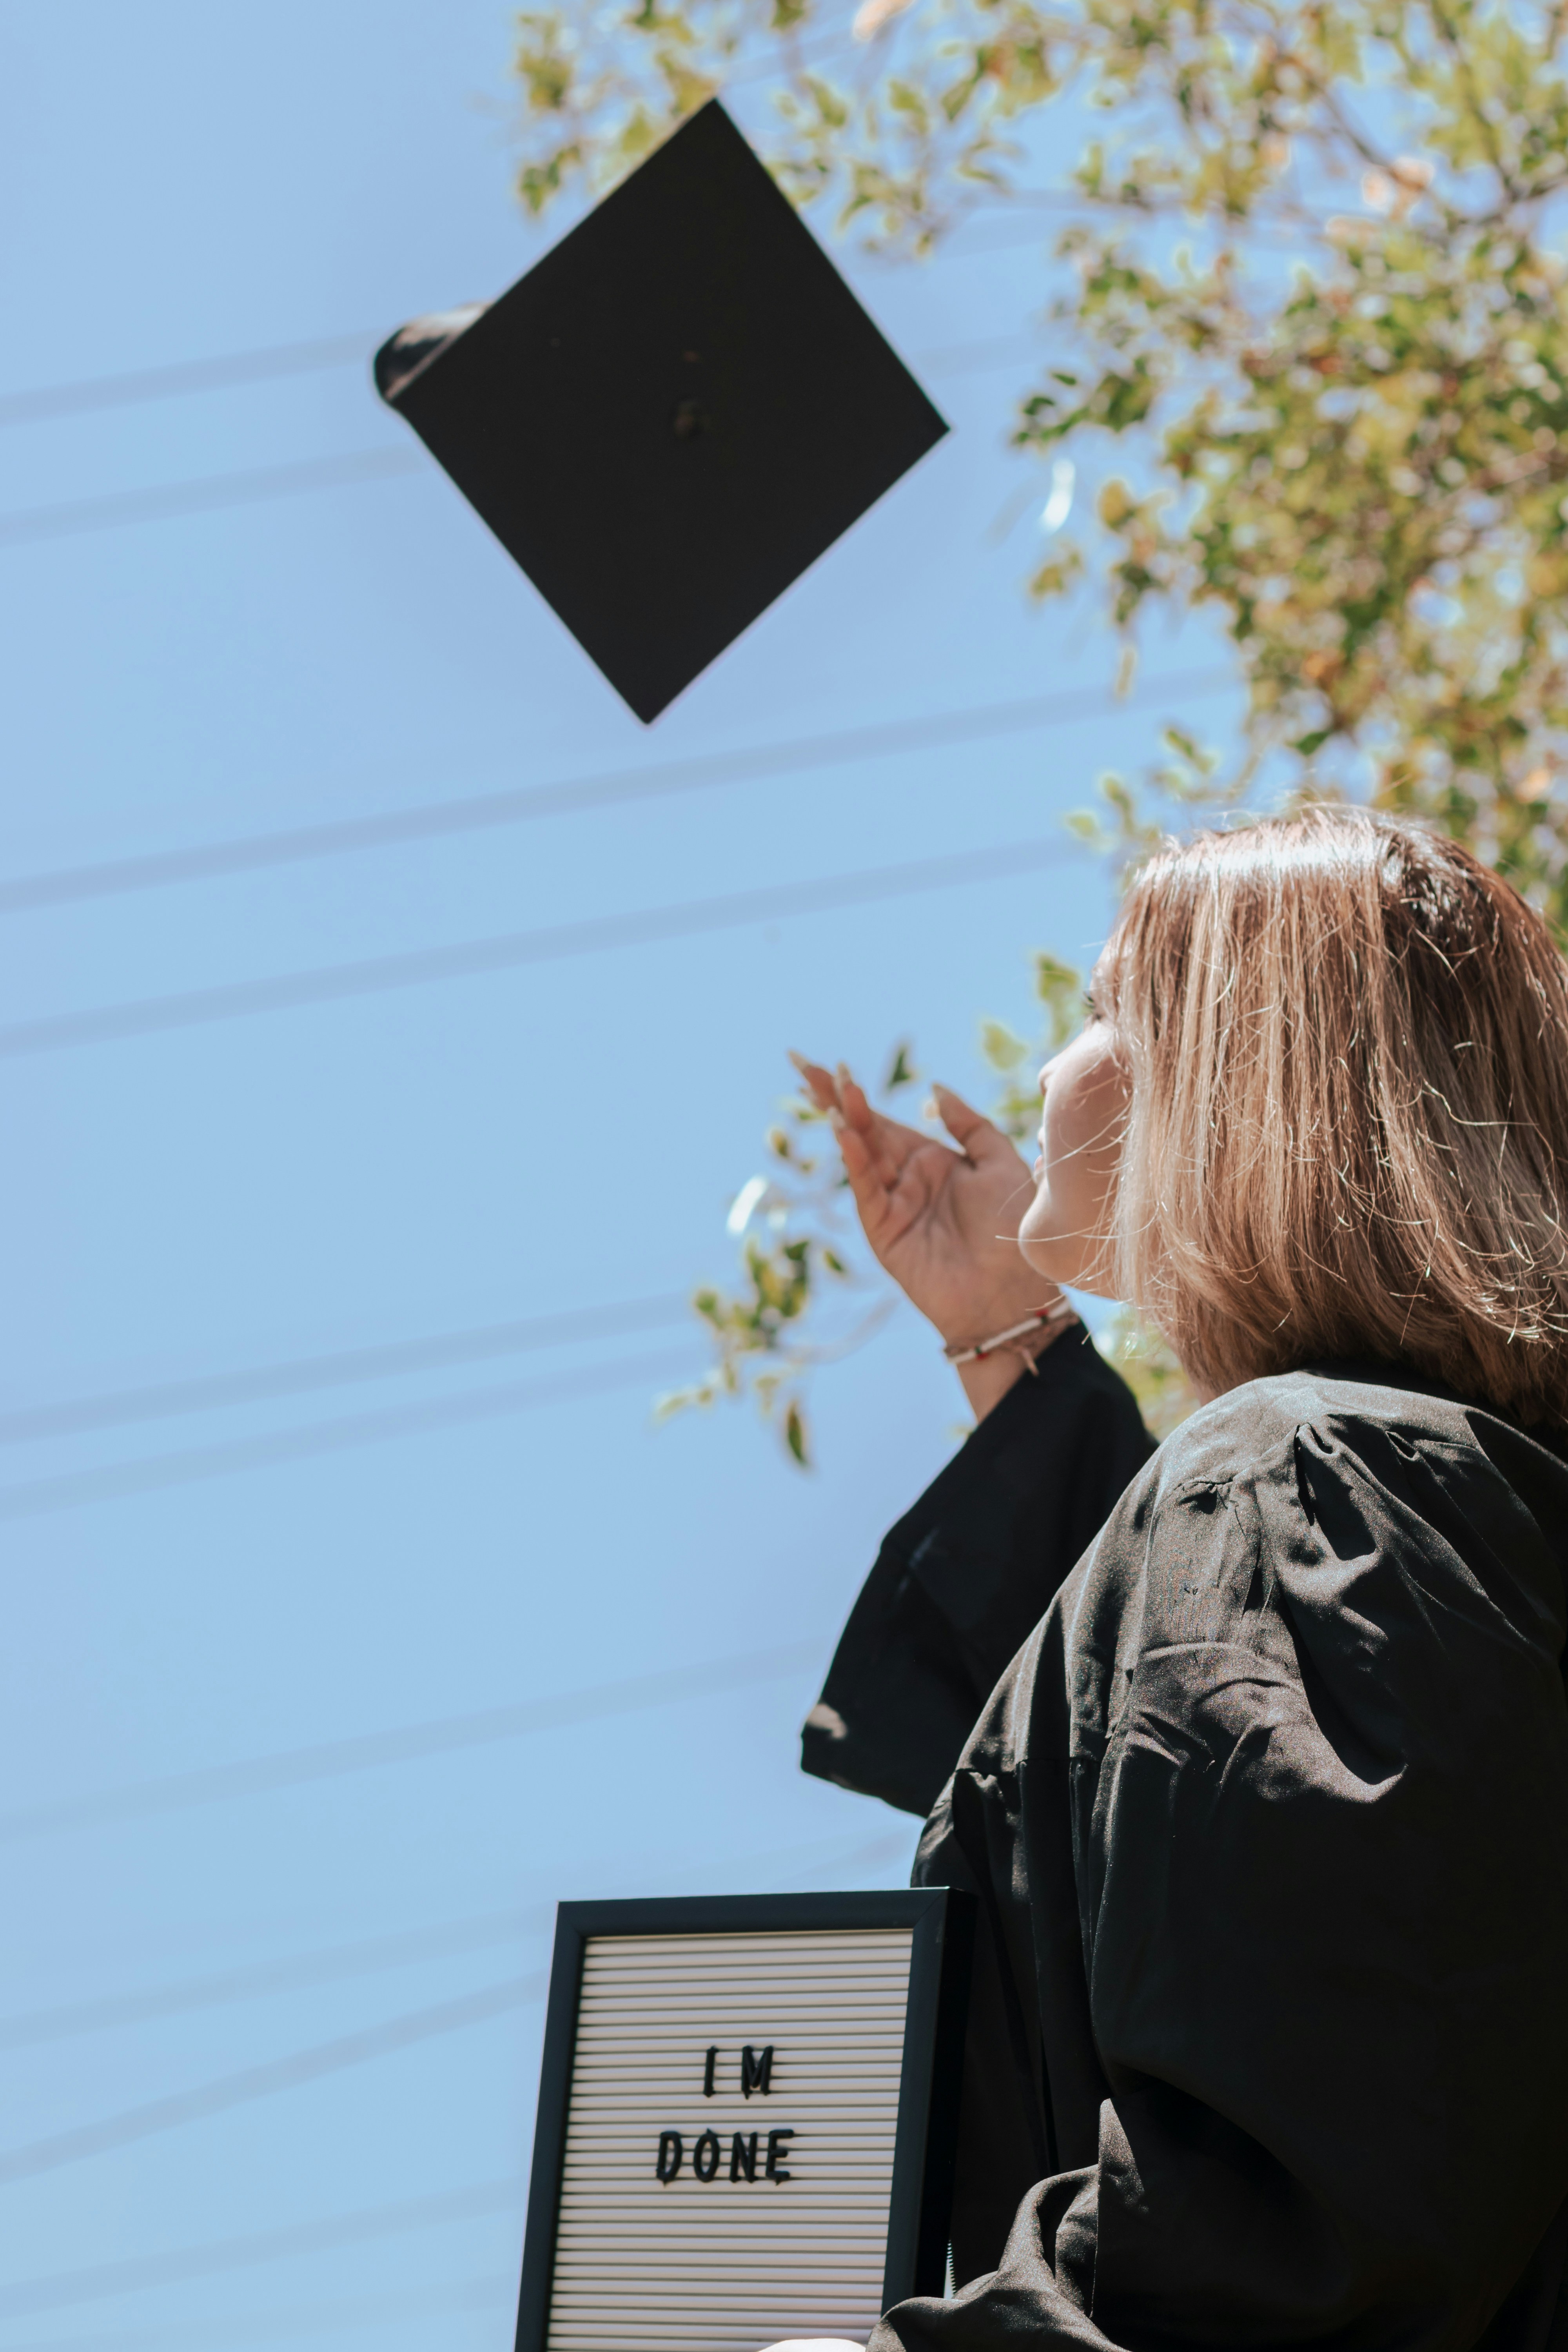 Graduation is always one of the biggest moments of your life, whether it's from high school, college, or grad school. Unsplash has a gorgeous collection of graduation pictures, so you can depict it the right way. 100% free to use!